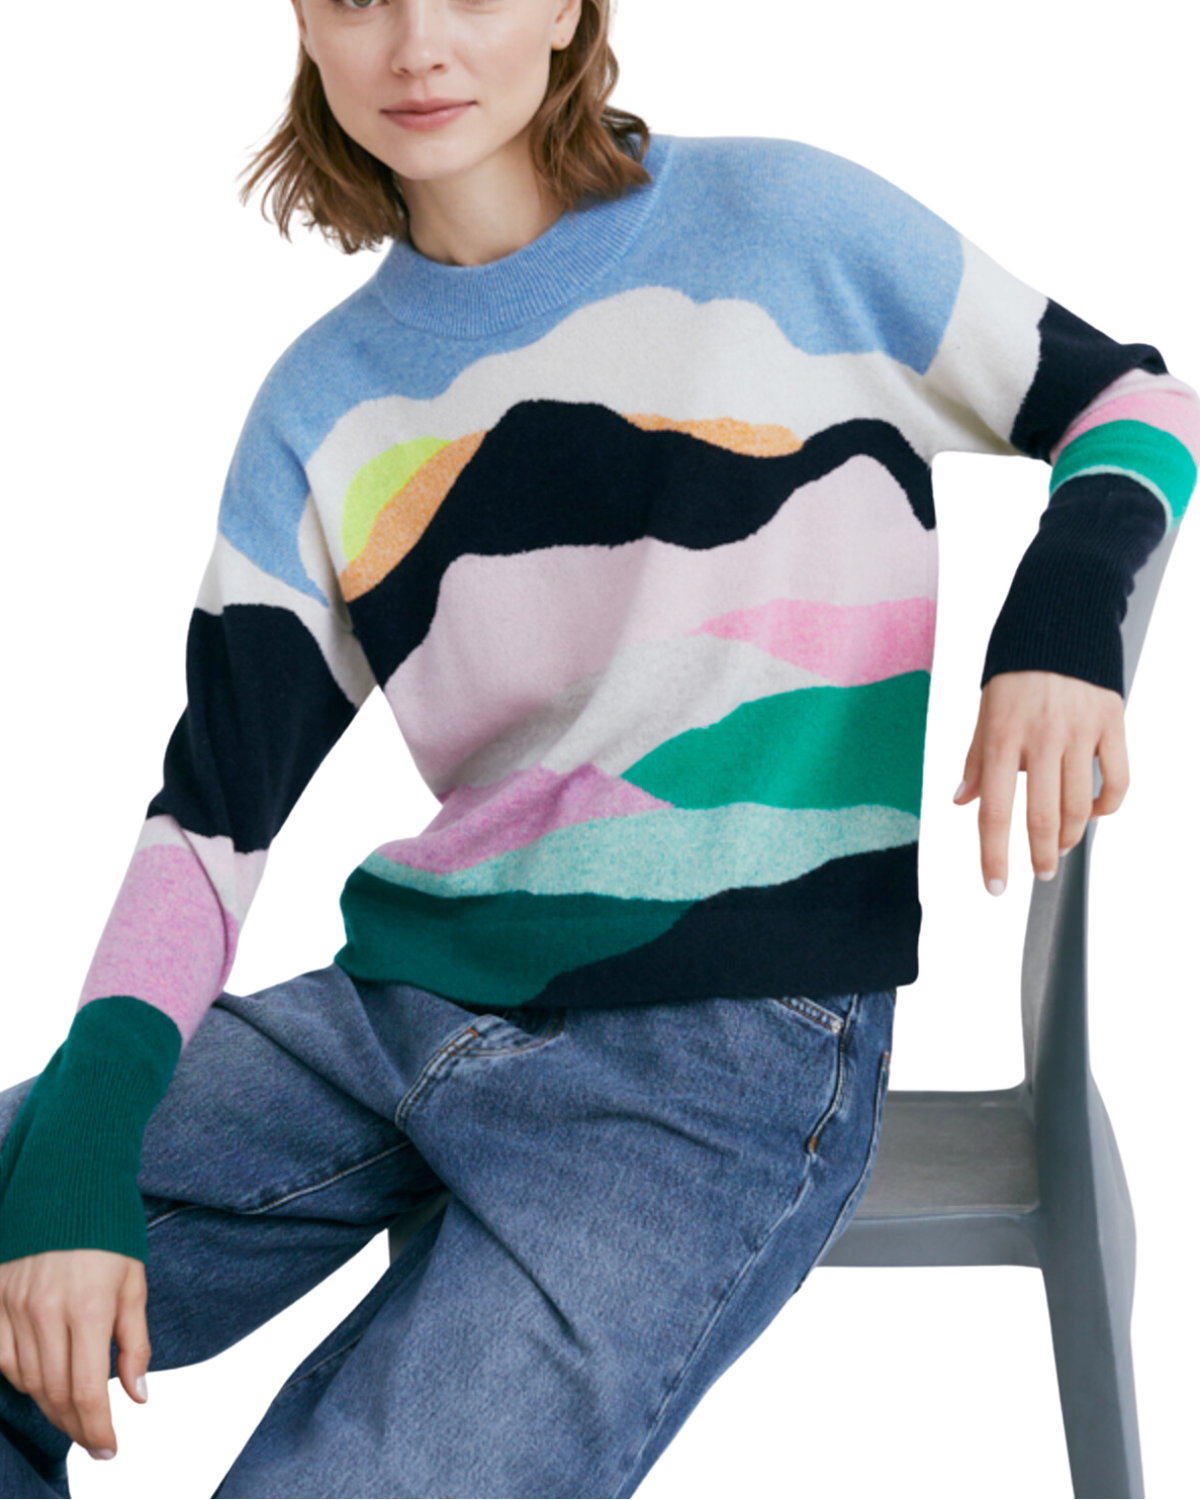 Peaks and Valleys Intarsia Sweater (Bright Combo)